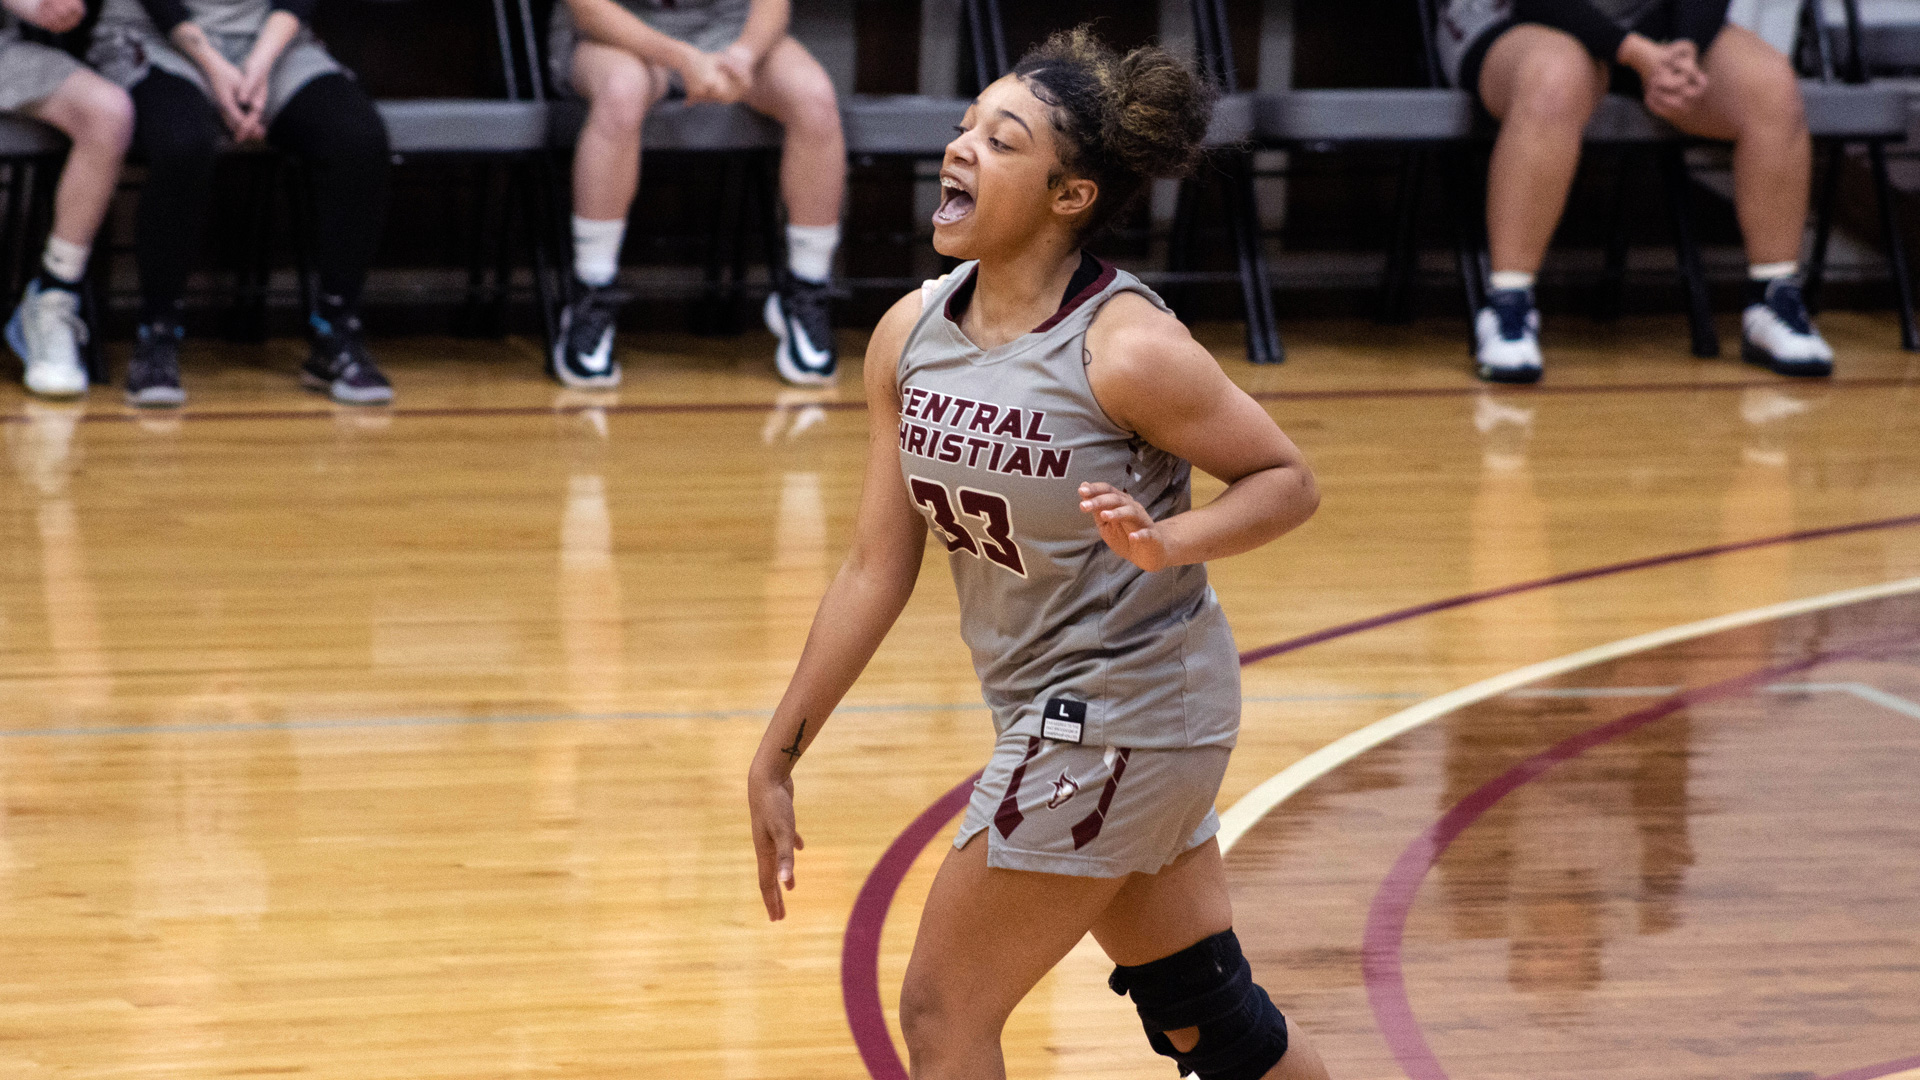 Atira Davis brings the ball up the court during the first half of the Saints' 59-46 win over Union College on Thursday.